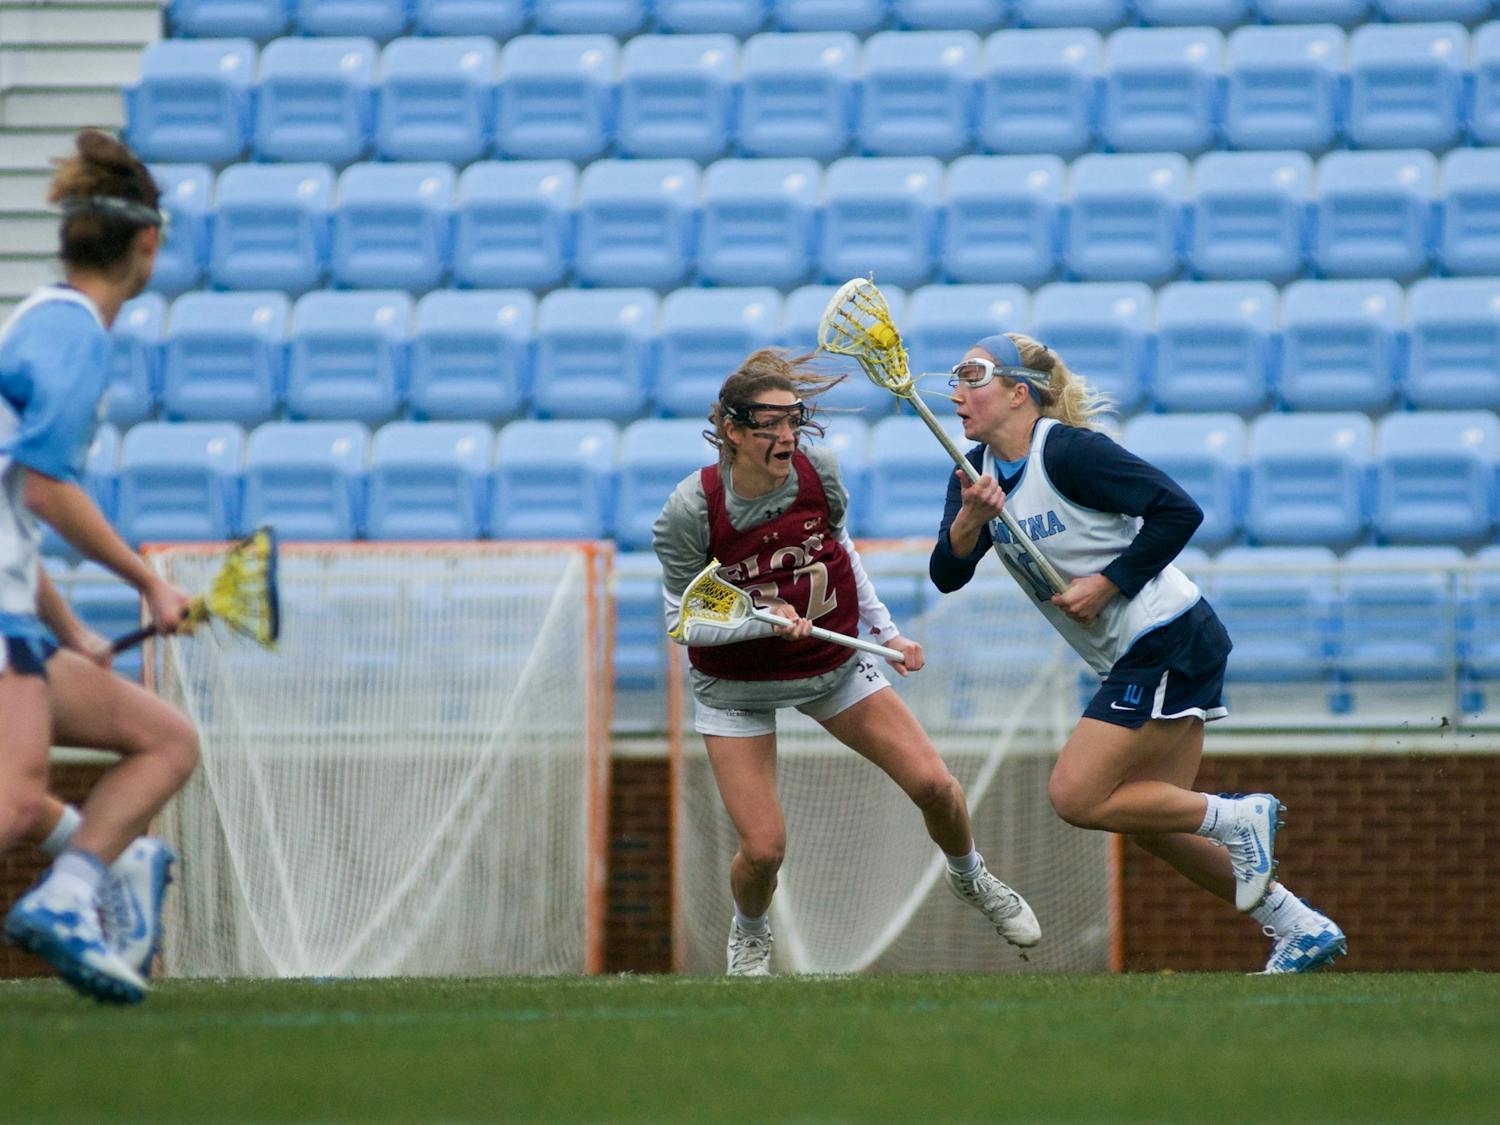 UNC Junior attacker Taylor McDaniels (10) looks for scoring opportunities. The Tar Heels won 20-3 over Elon during the exhibition match on Feb. 1, 2020, at Dorrance Field. 